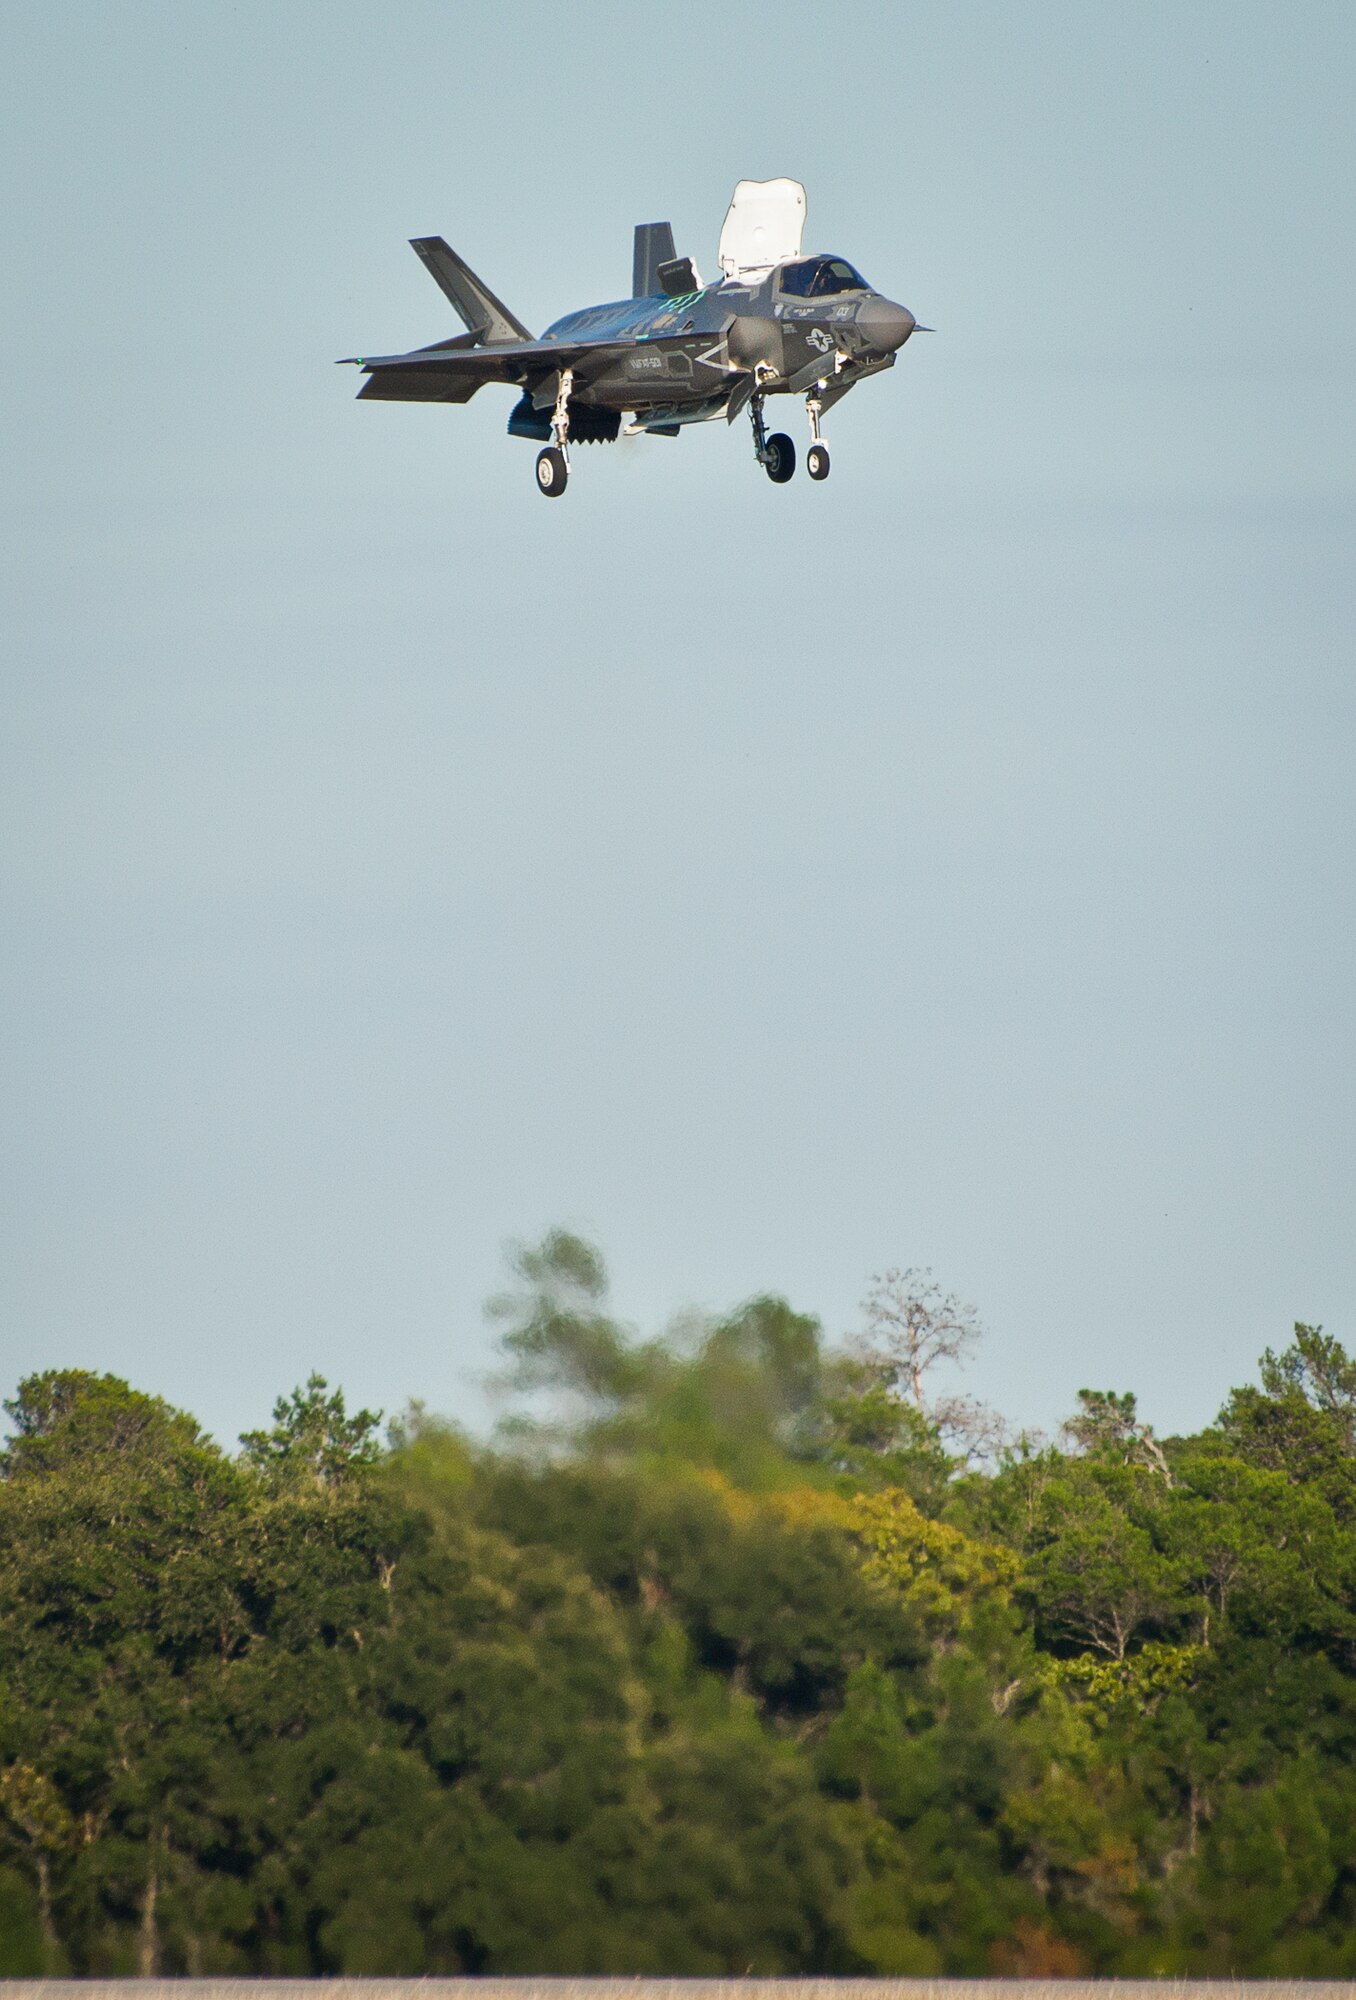 A Marine F-35B joint strike fighter hovers over the runway during the first short take-off and vertical landing mission at Eglin Air Force Base, Fla., Oct. 25. The milestone training mission was flown by Maj. Brendan M. Walsh, of the Marine Fighter Attack Training Squadron-501.  Walsh recently qualified in vertical landing operations at Marine Corps Air Station Yuma, Ariz. in preparation for this mission.  (U.S. Air Force photo/Samuel King Jr.)